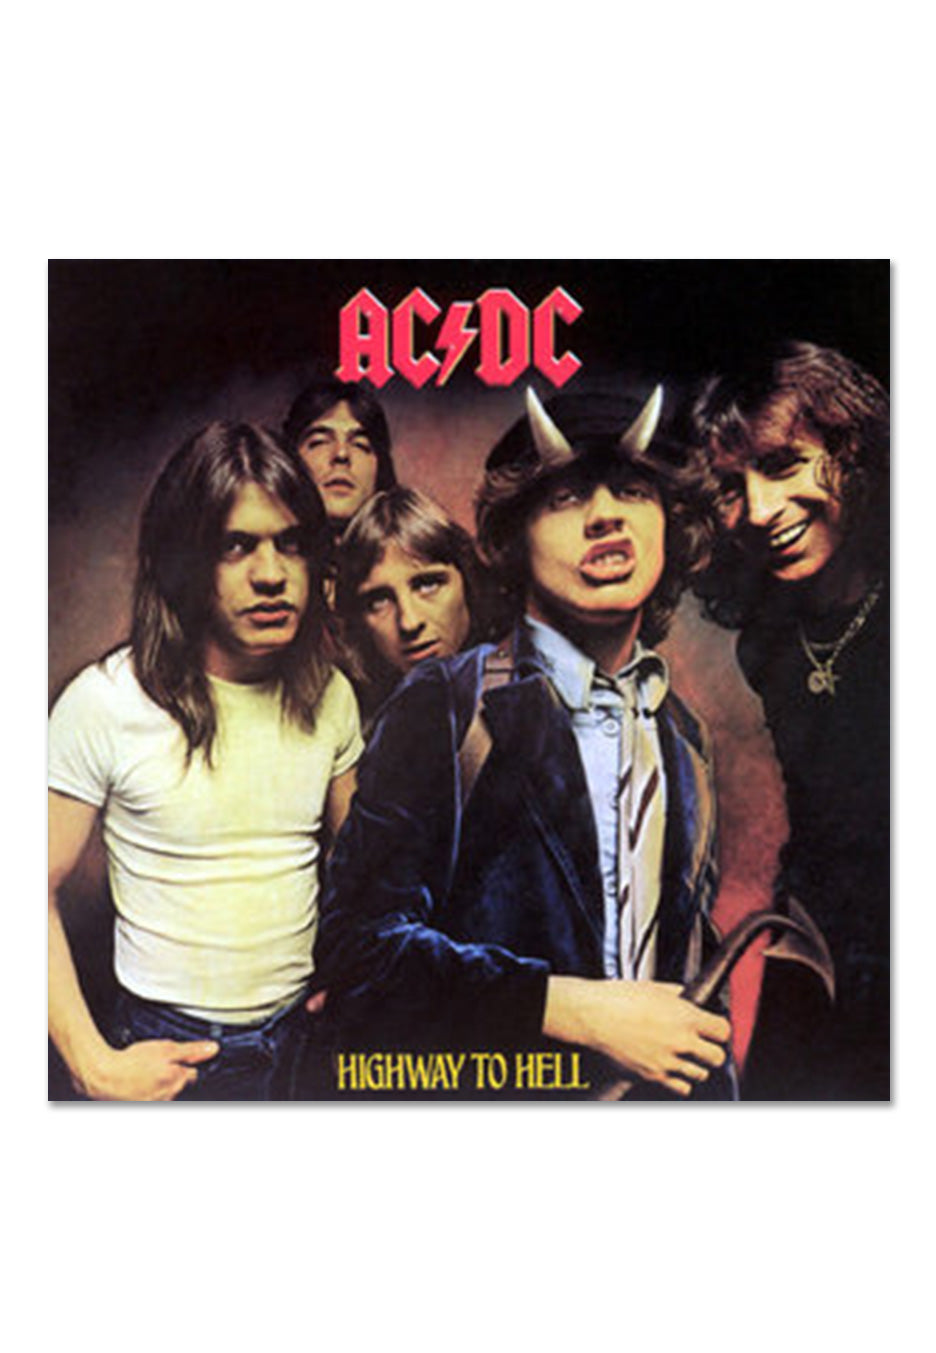 AC/DC - Highway To Hell (Limited 50th Anniversary Edition) Gold - Colored Vinyl